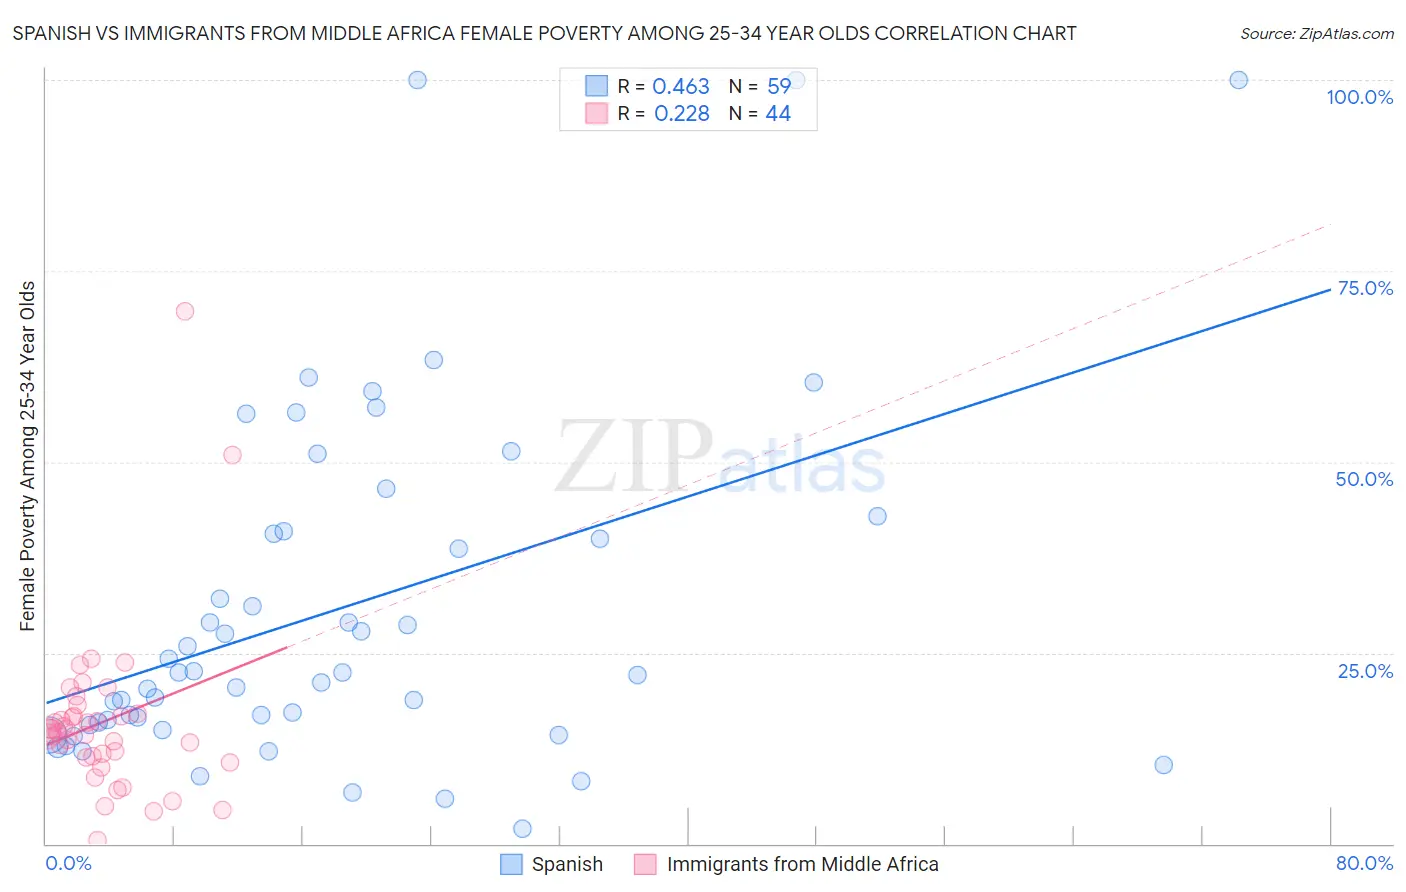 Spanish vs Immigrants from Middle Africa Female Poverty Among 25-34 Year Olds